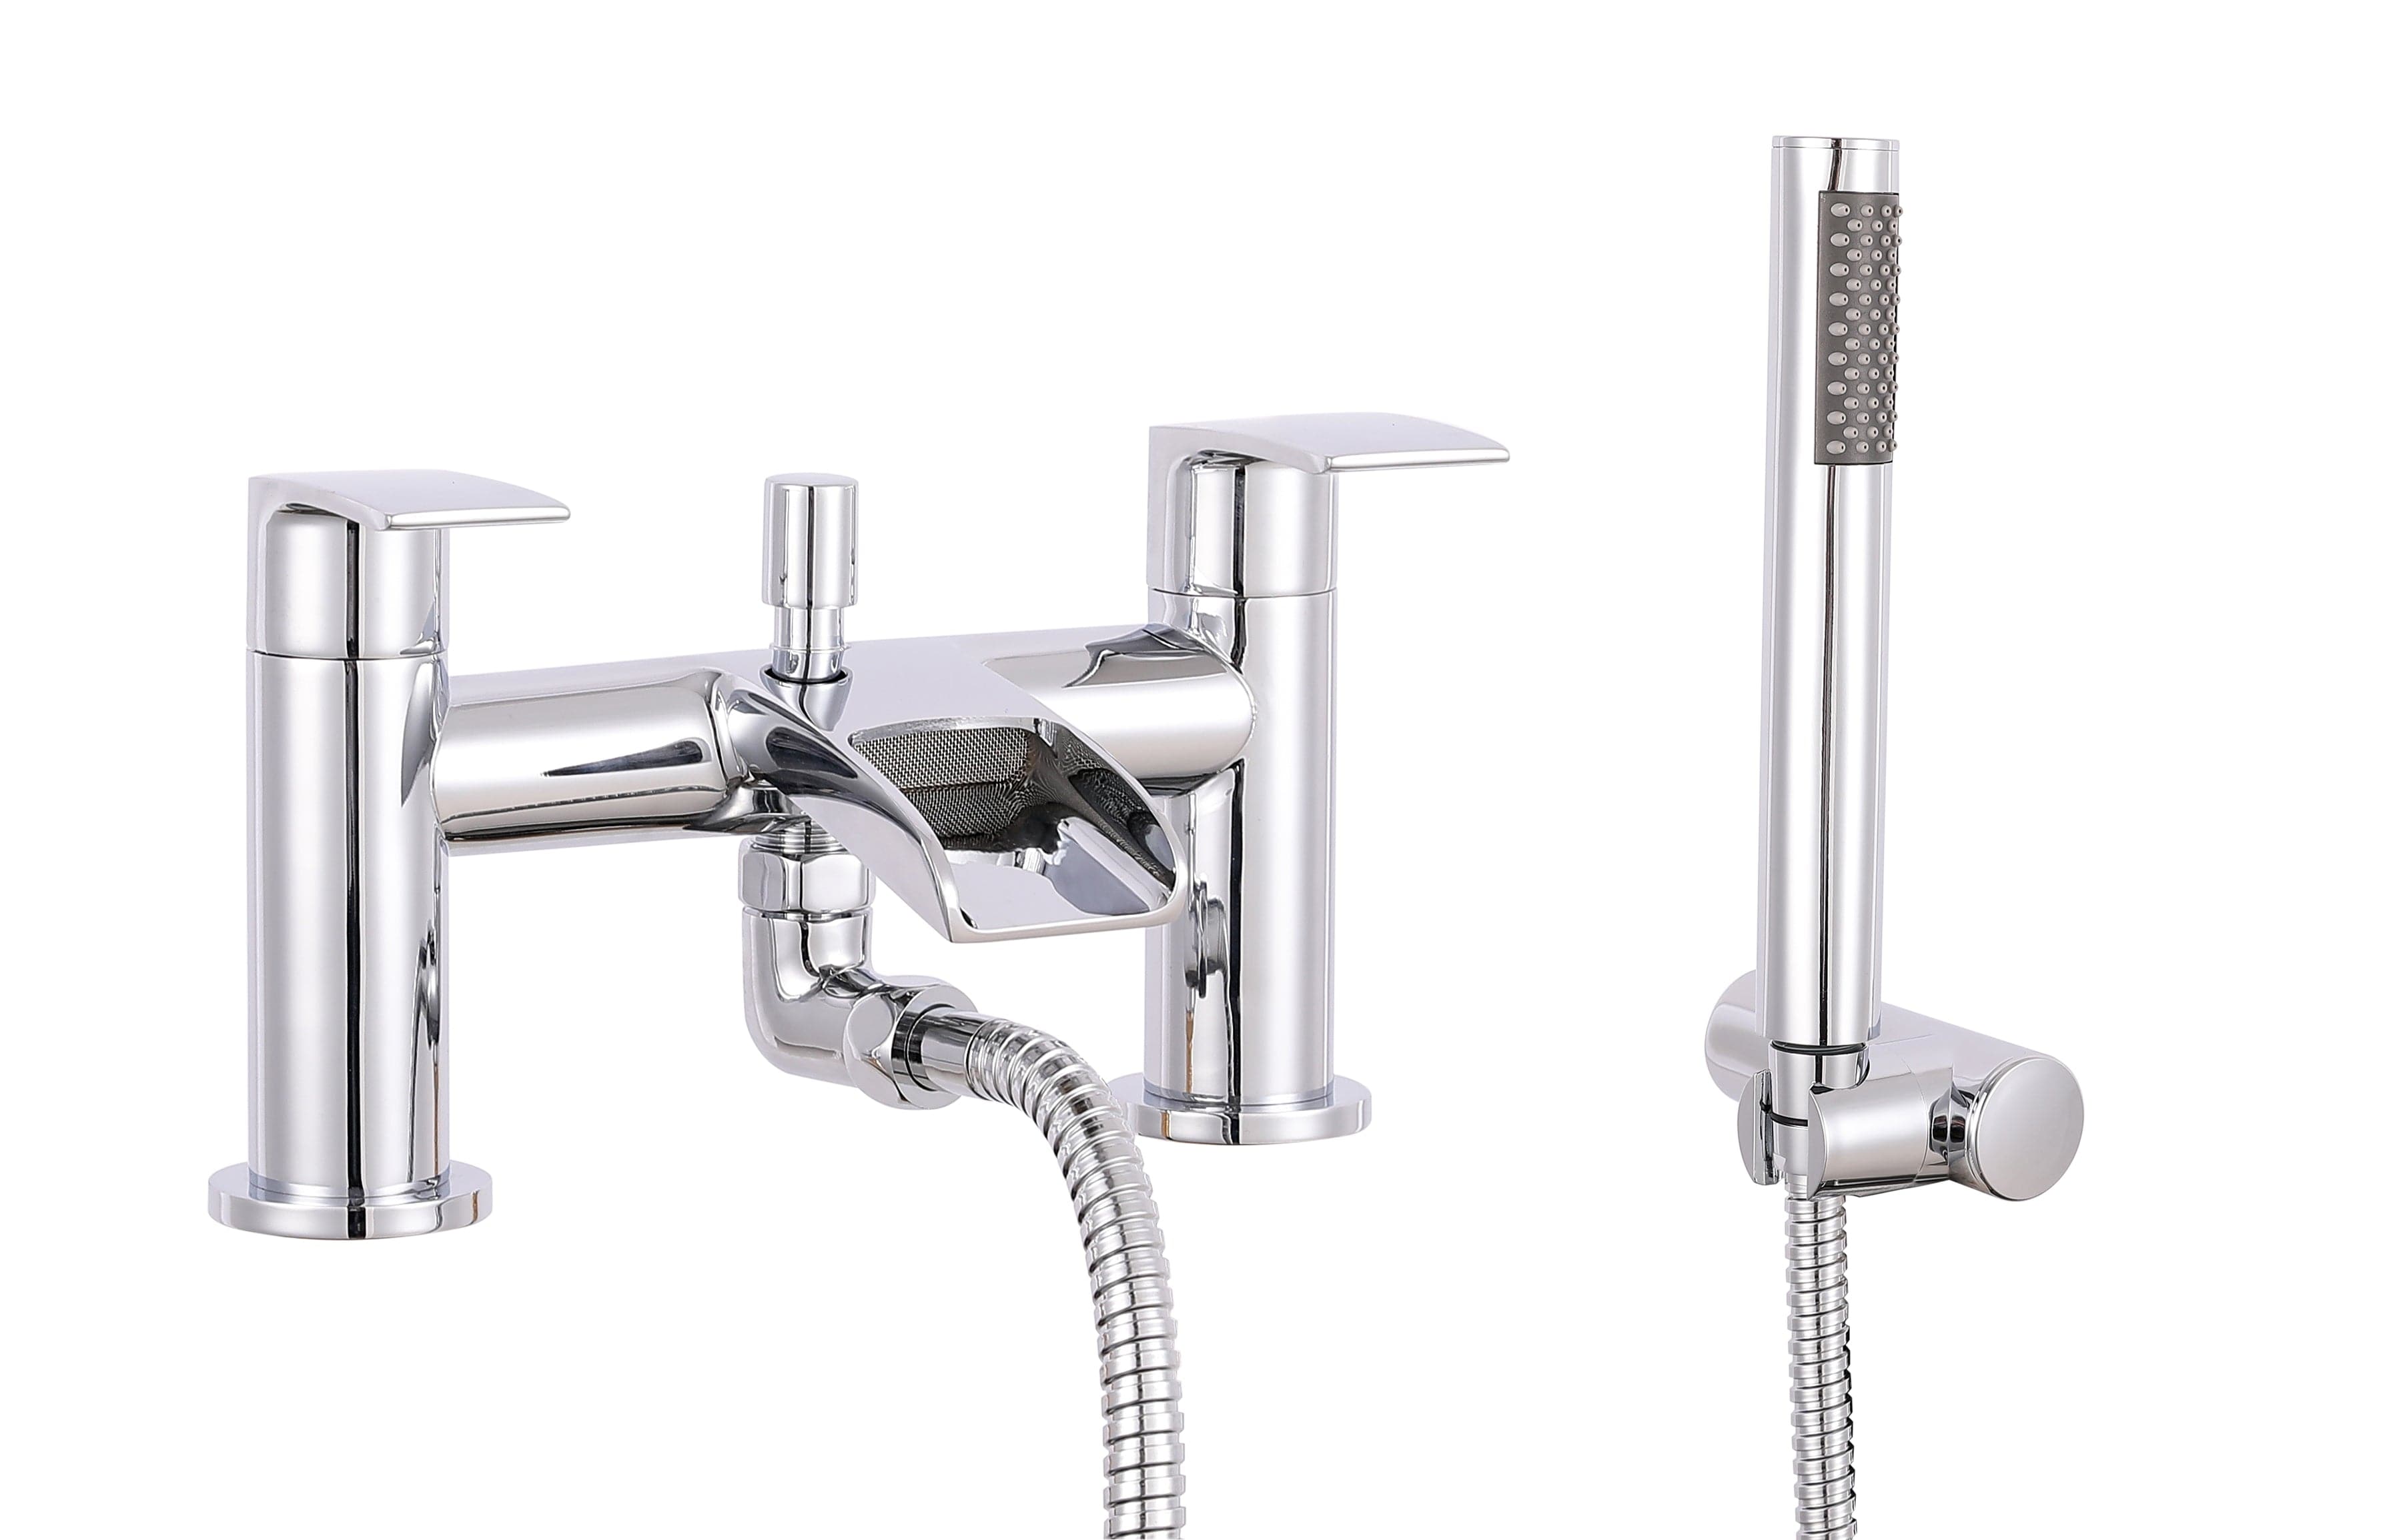 Symphony Round Waterfall Bath Shower Mixer Tap with Kit - Chrome